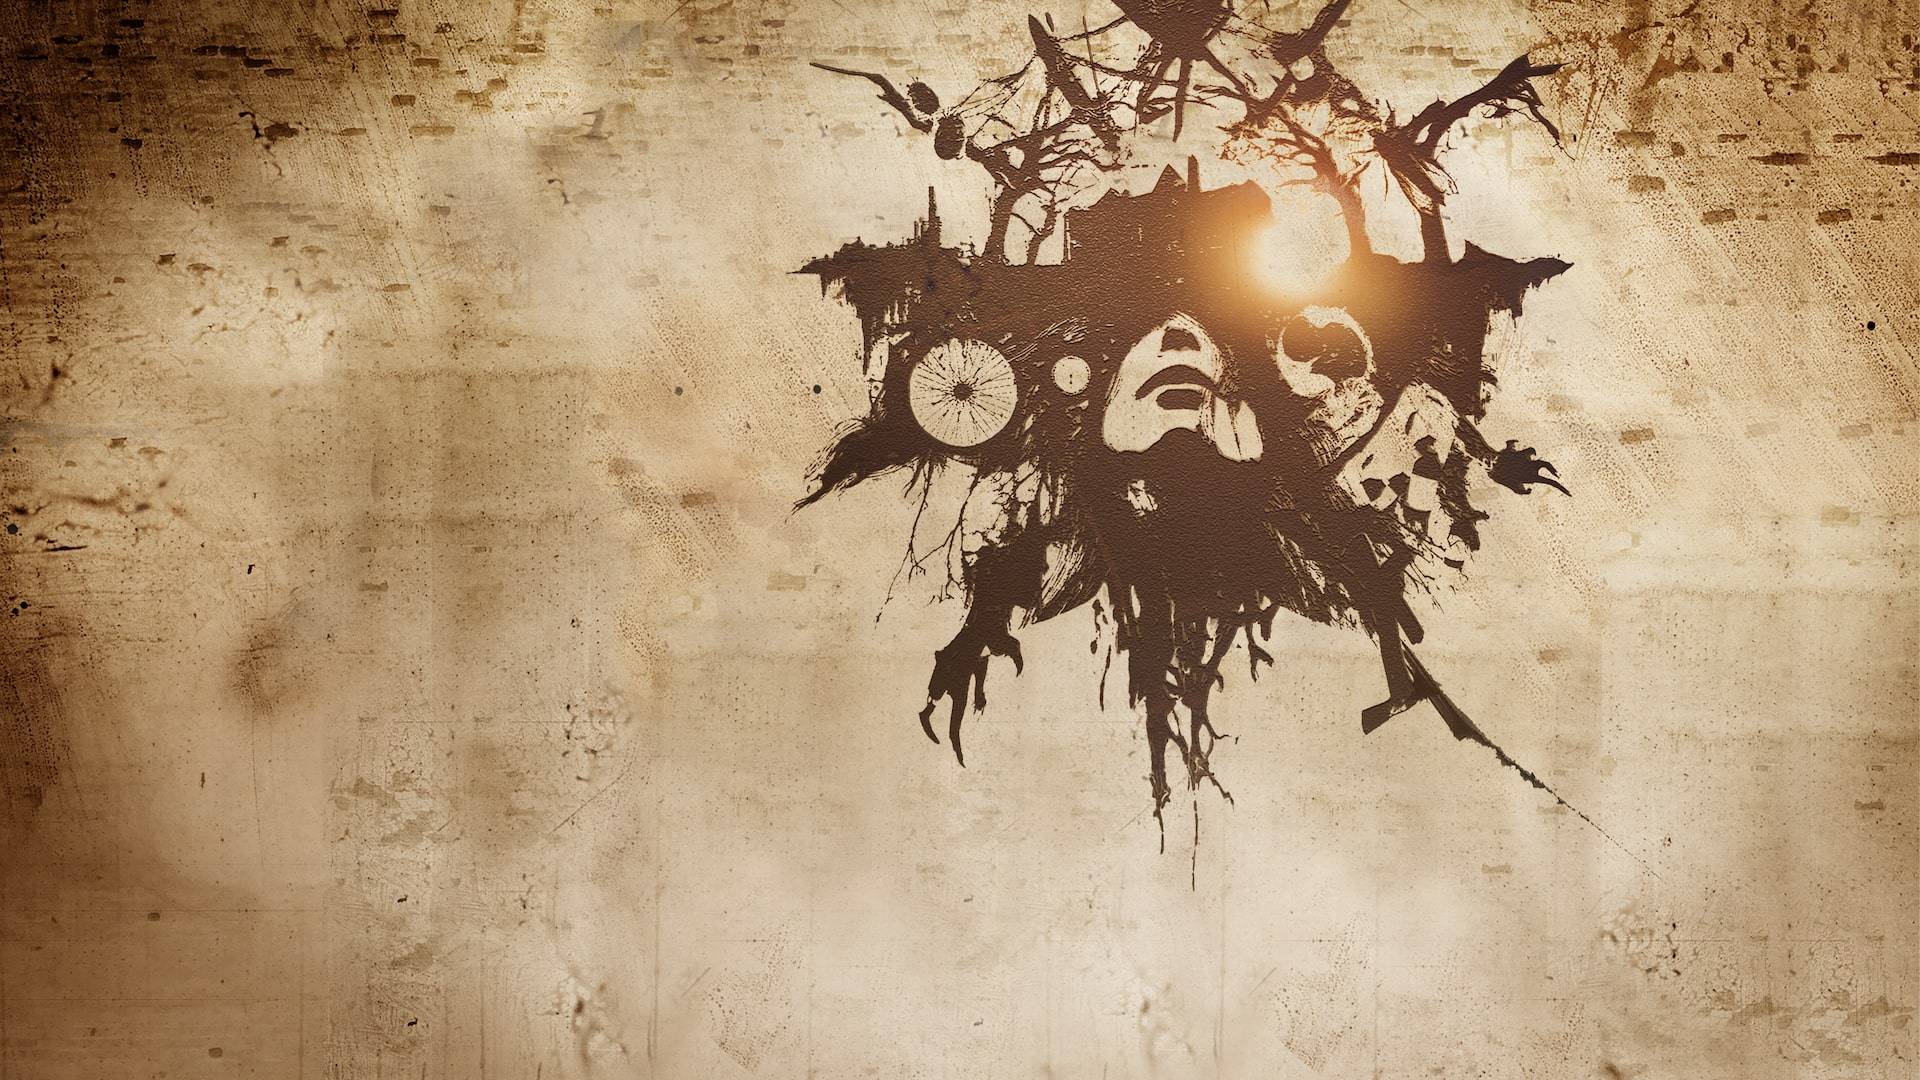 Resident Evil 7 is on discount at PlayStation store